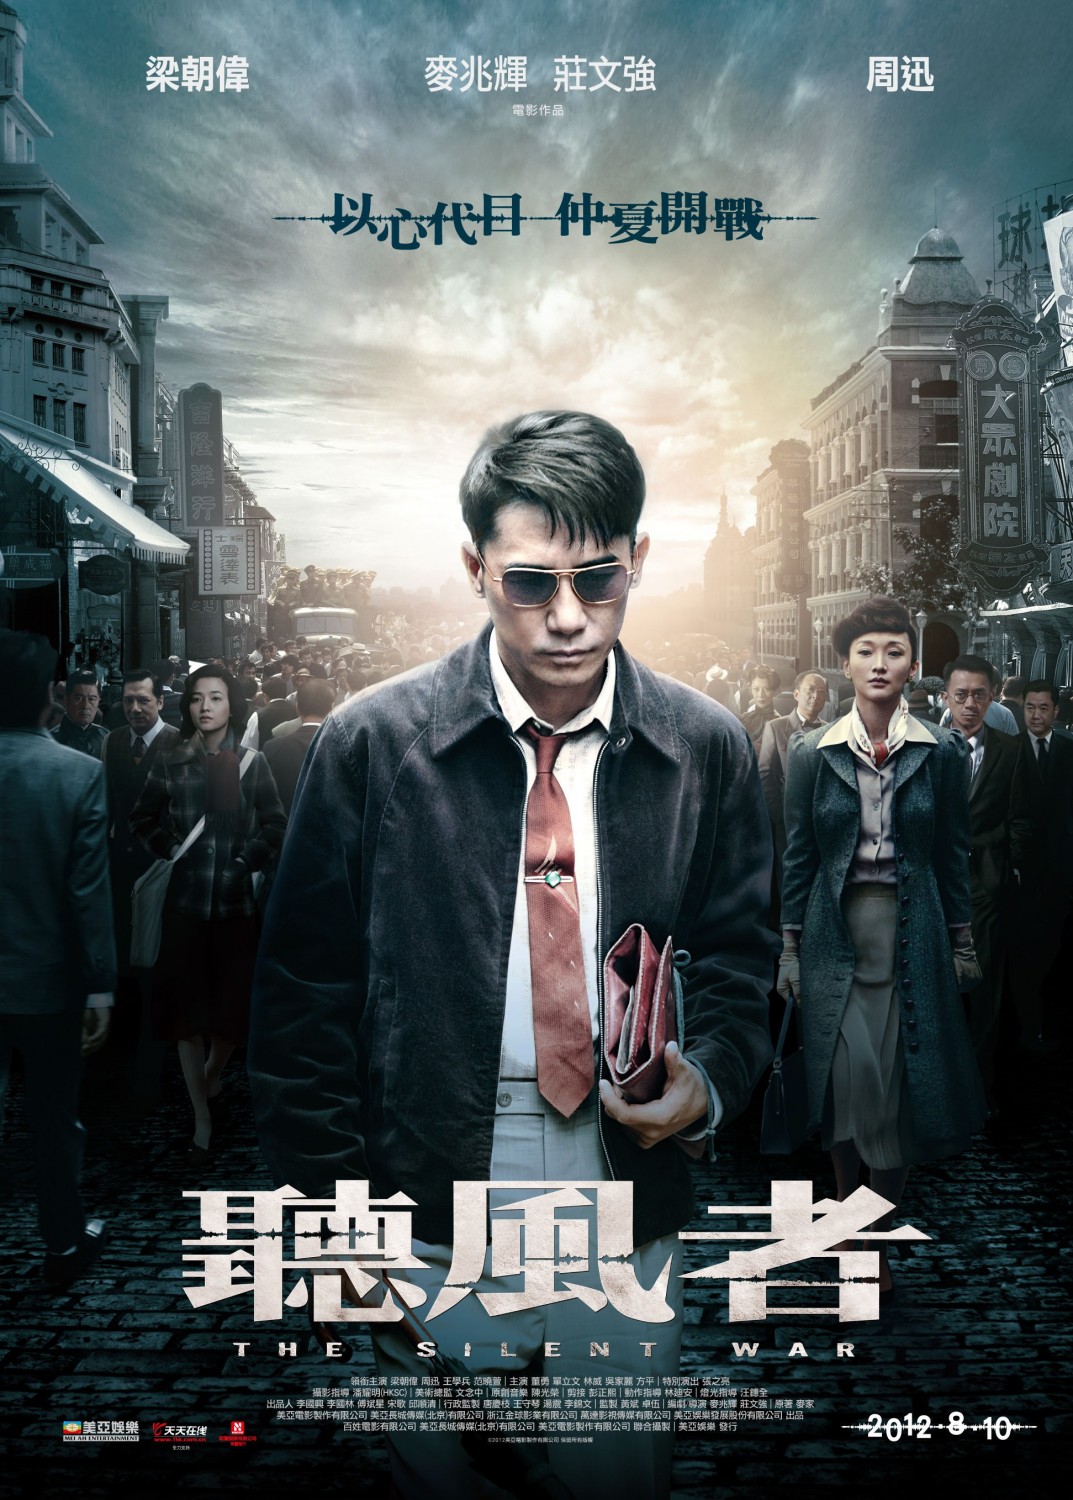 Extra Large Movie Poster Image for Ting feng zhe (#1 of 9)